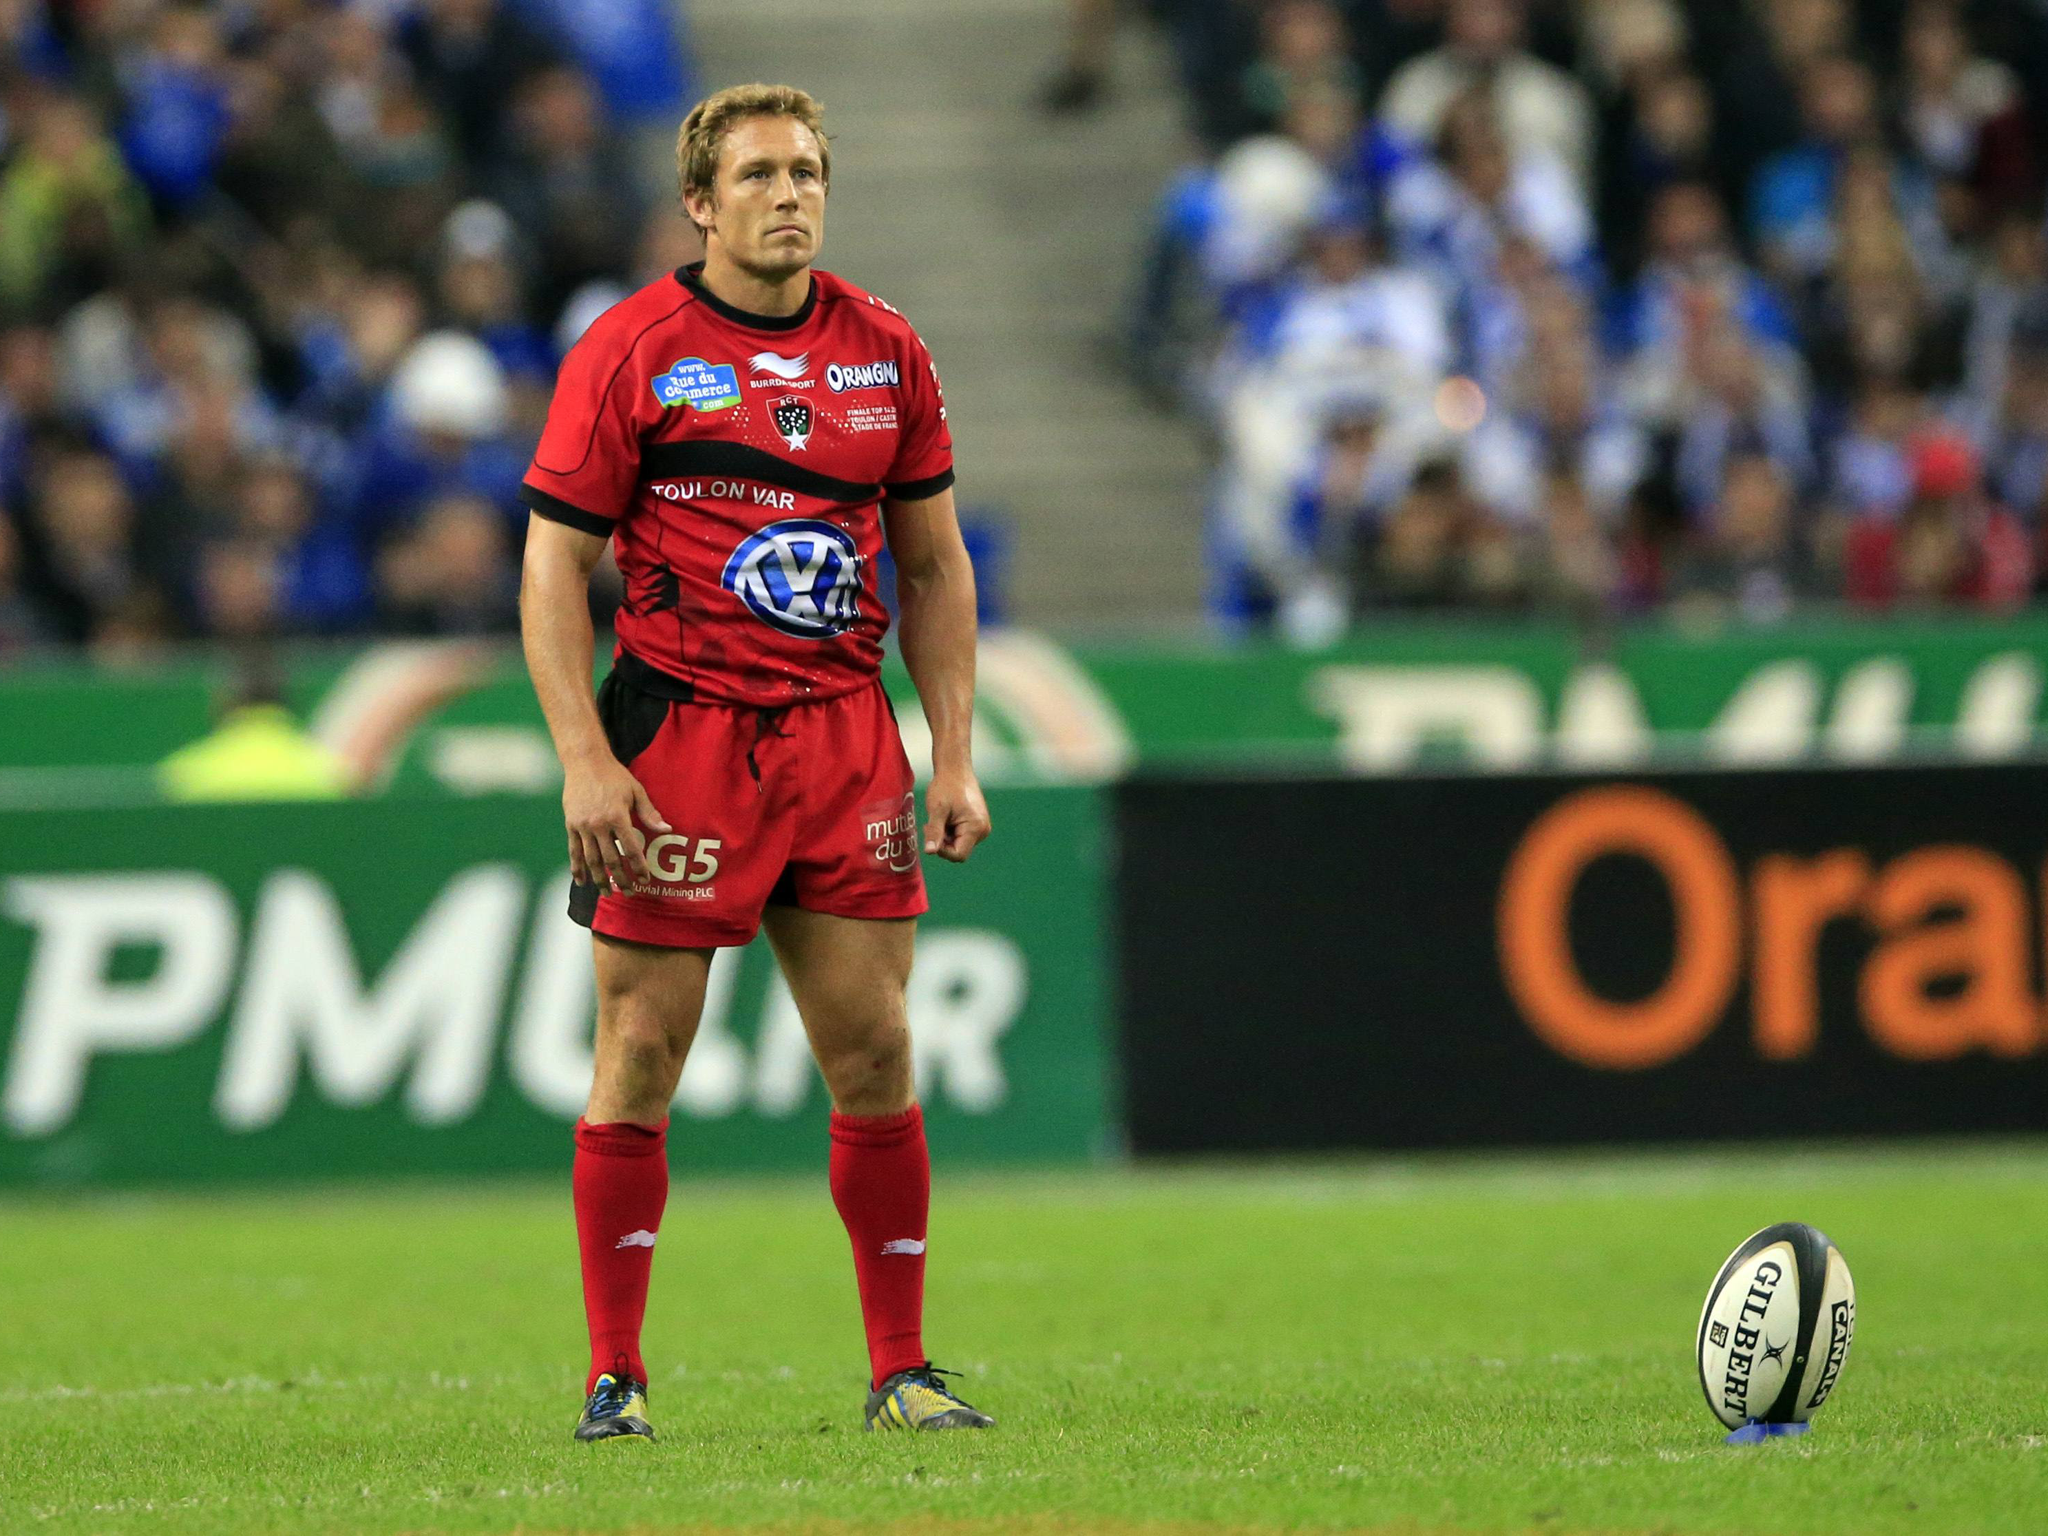 Toulon's Jonny Wilkinson lines up a penalty kick during the final against Castres at the Stade de France